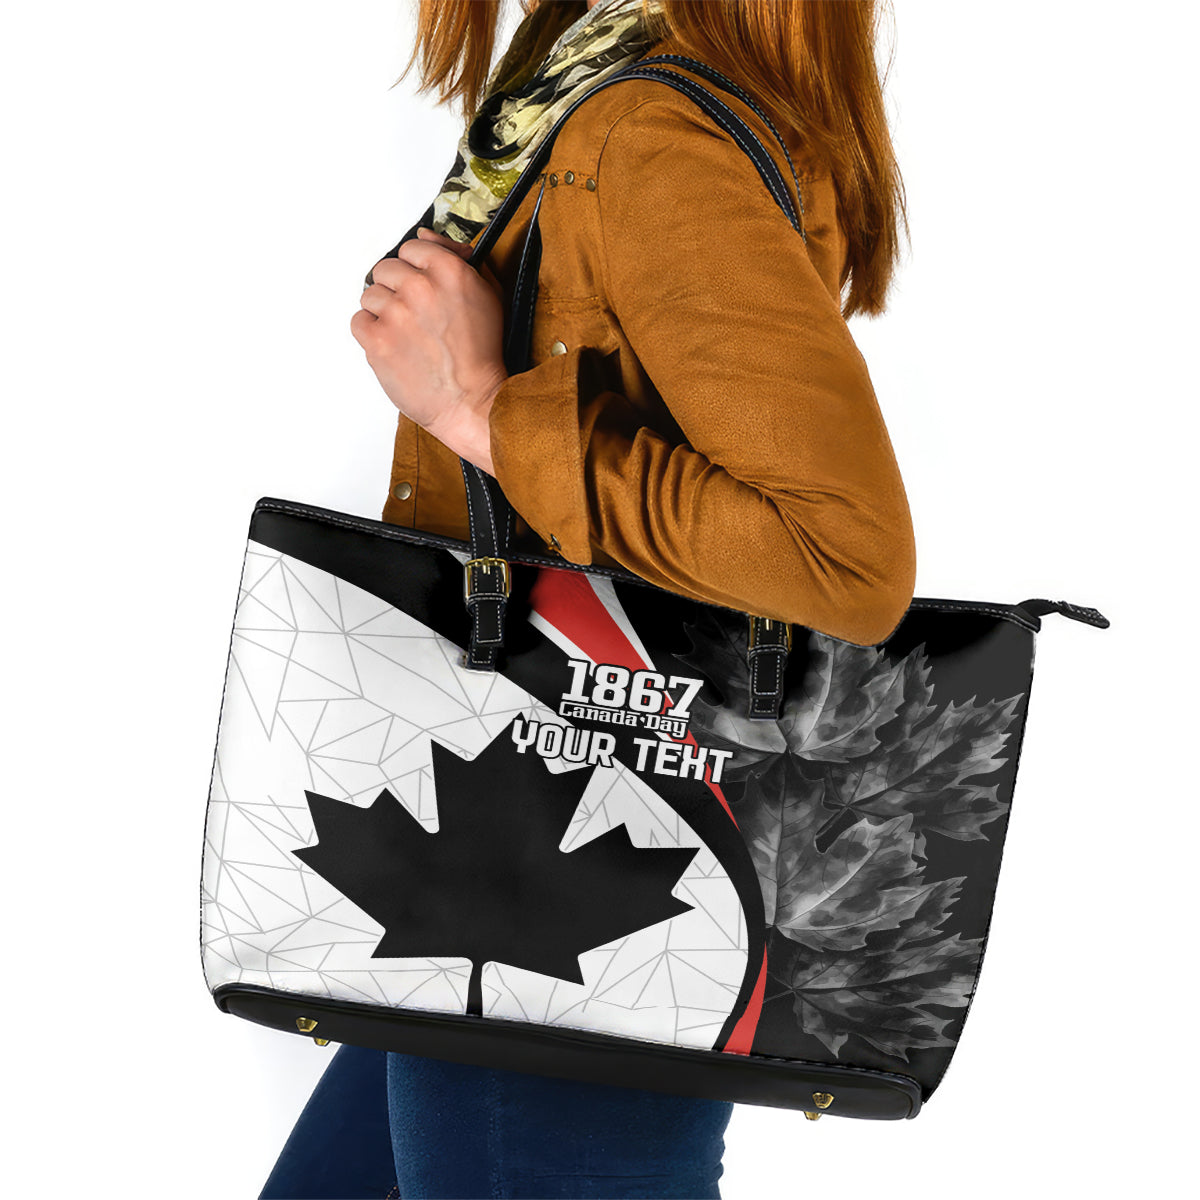 Personalized Canada Day Sine 1867 Leather Tote Bag With National Maple Leaf